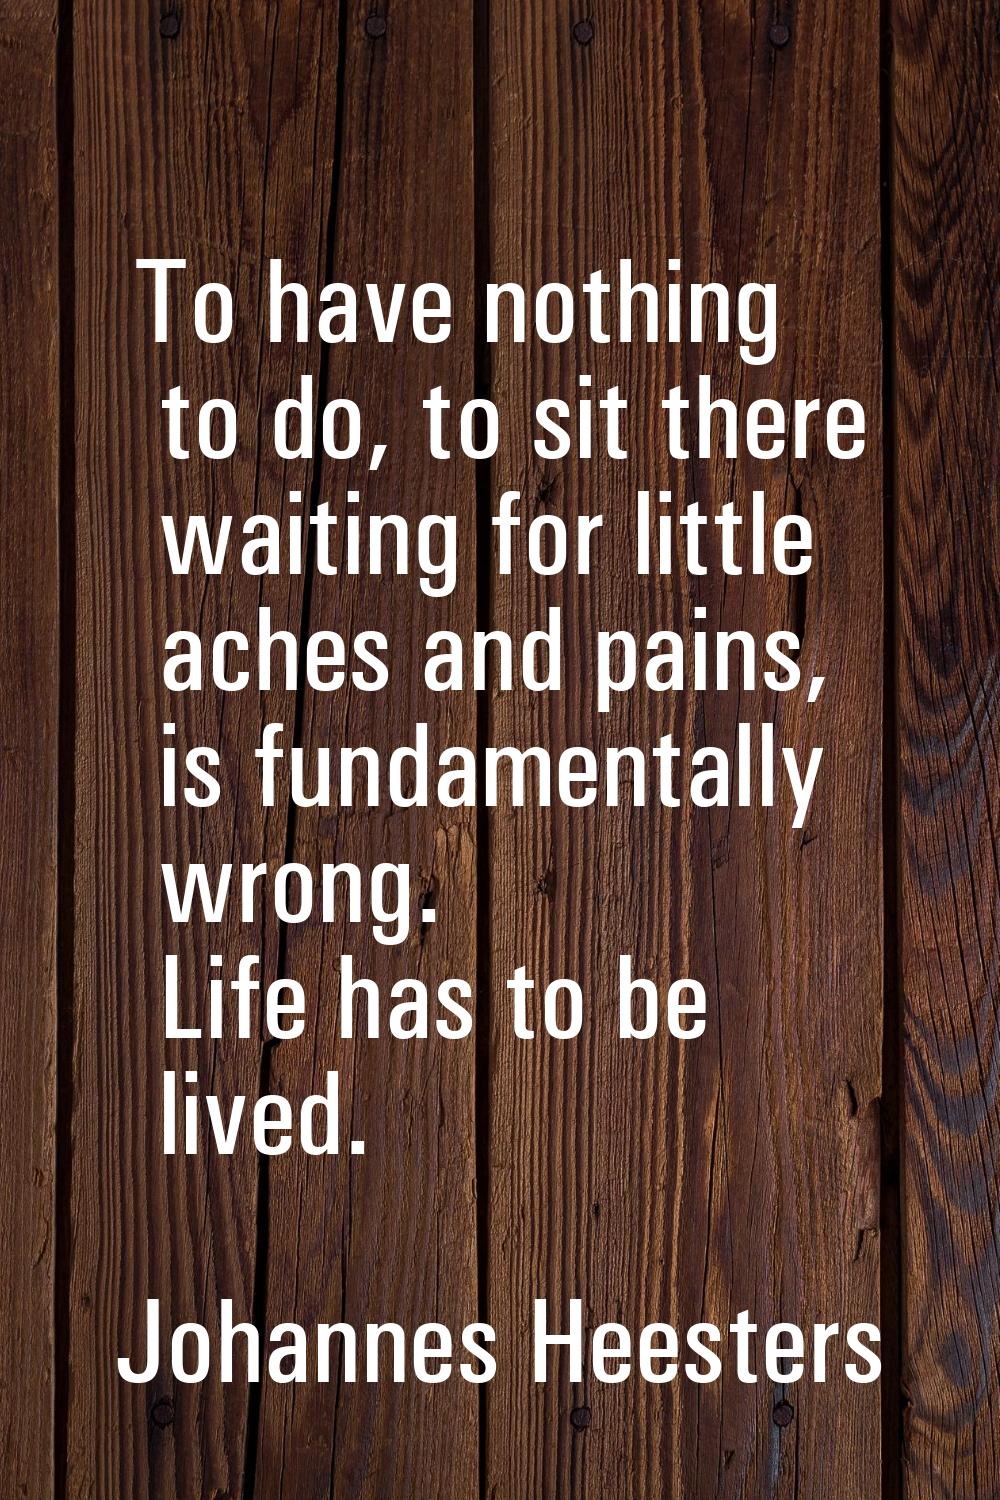 To have nothing to do, to sit there waiting for little aches and pains, is fundamentally wrong. Lif